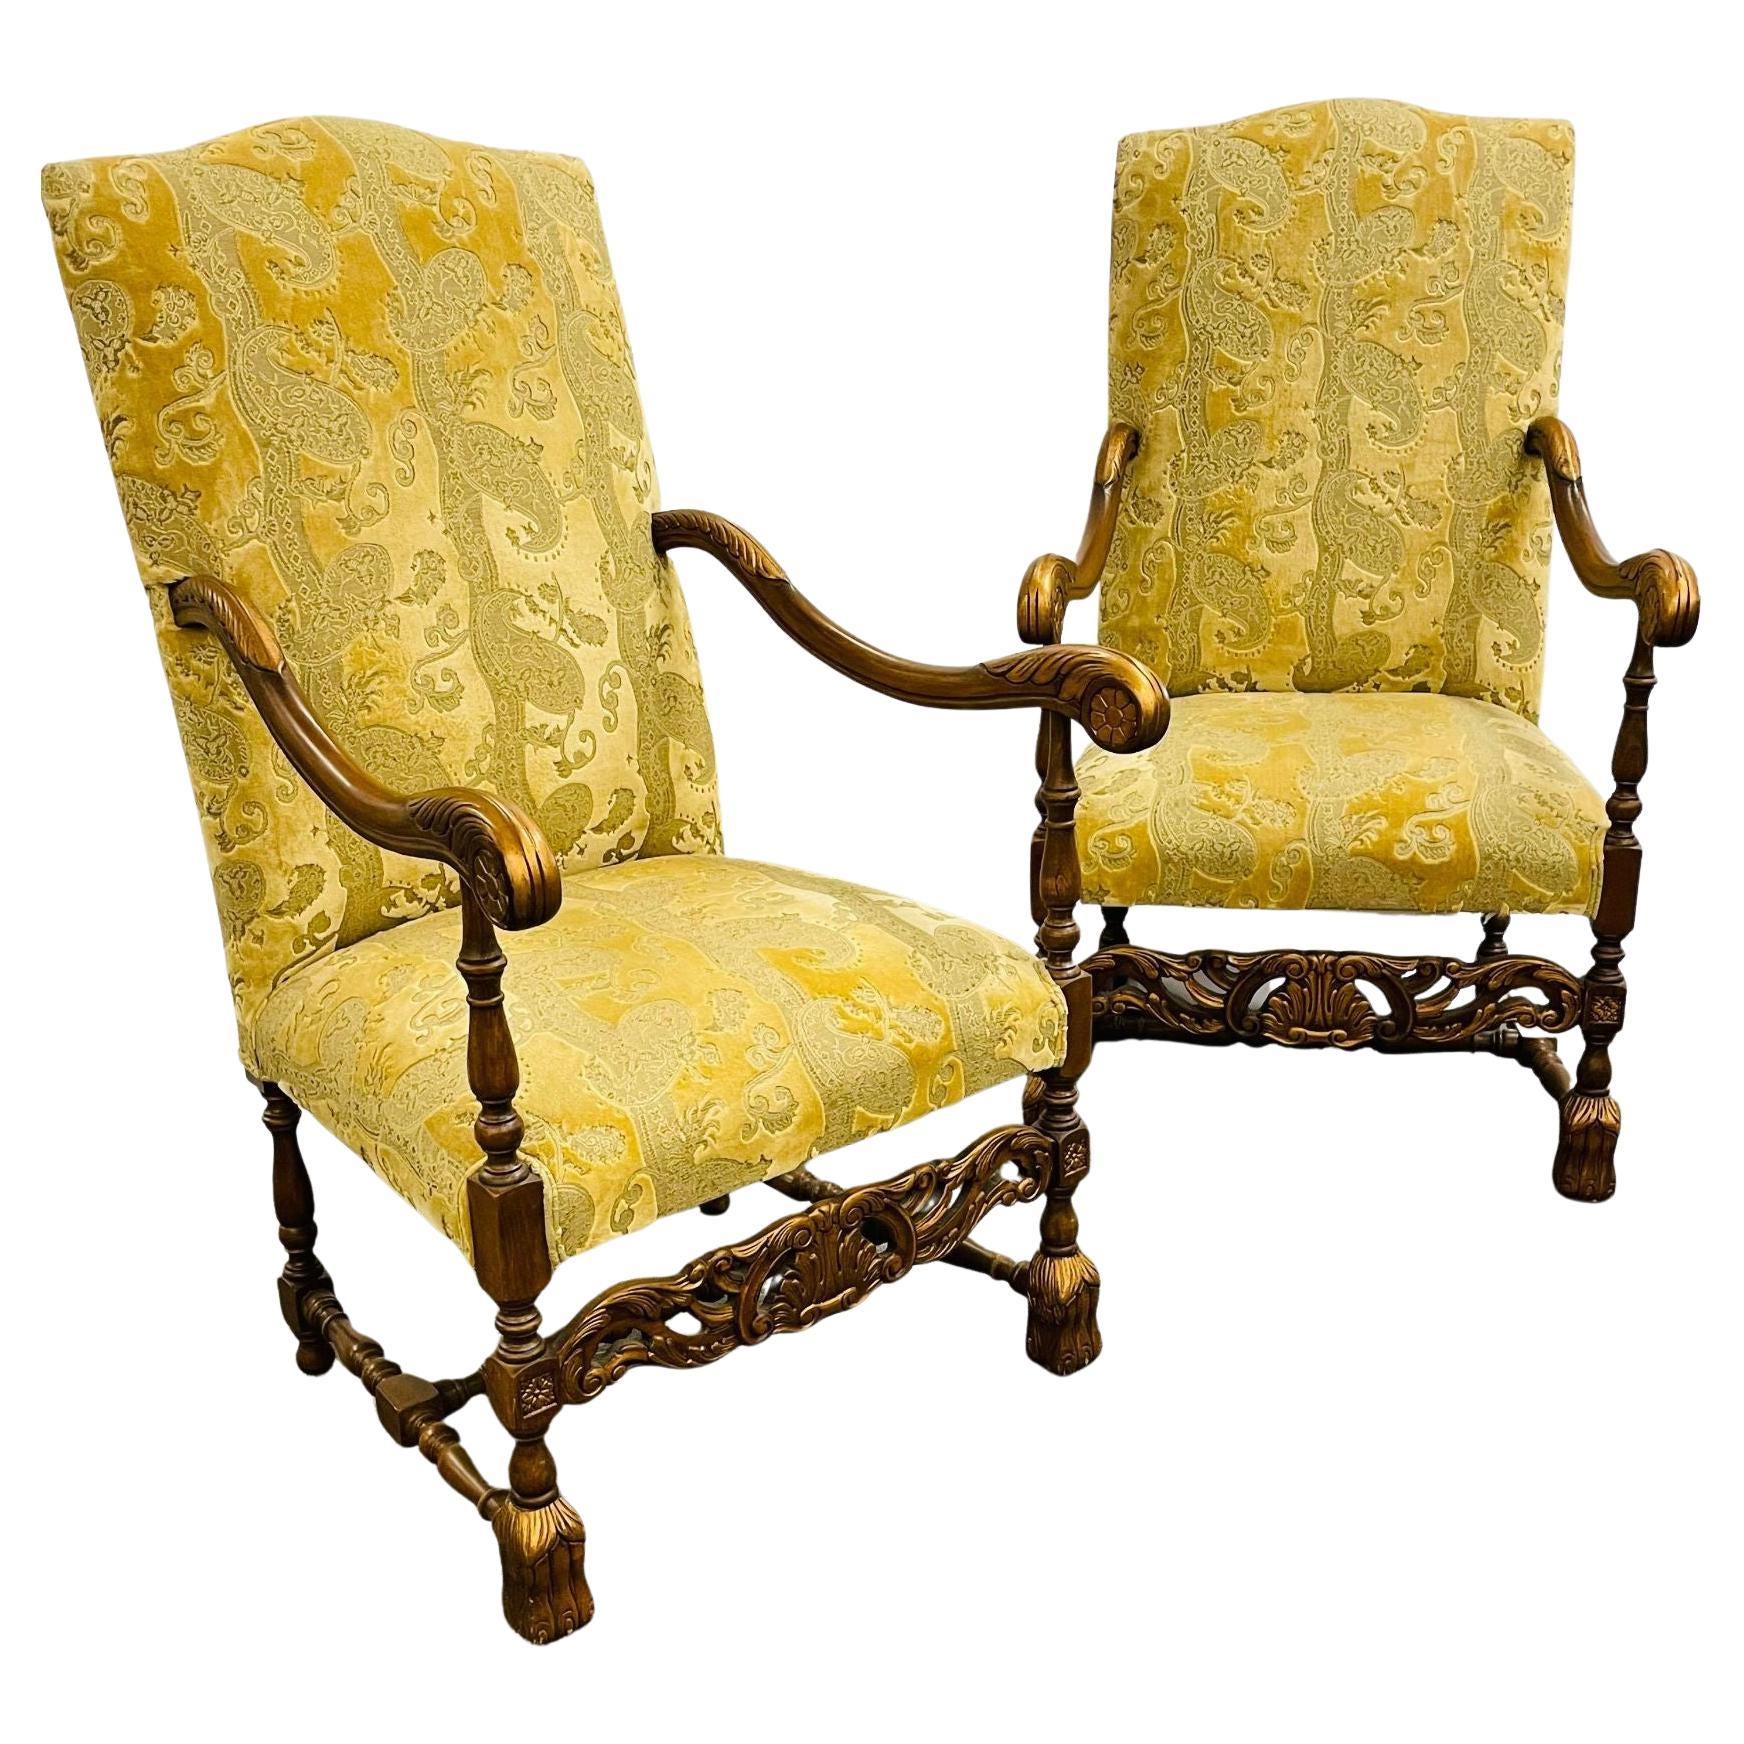 Pair of Throne Chairs, Fauteuils in Louis XIV Fashion, Fine Upholstery